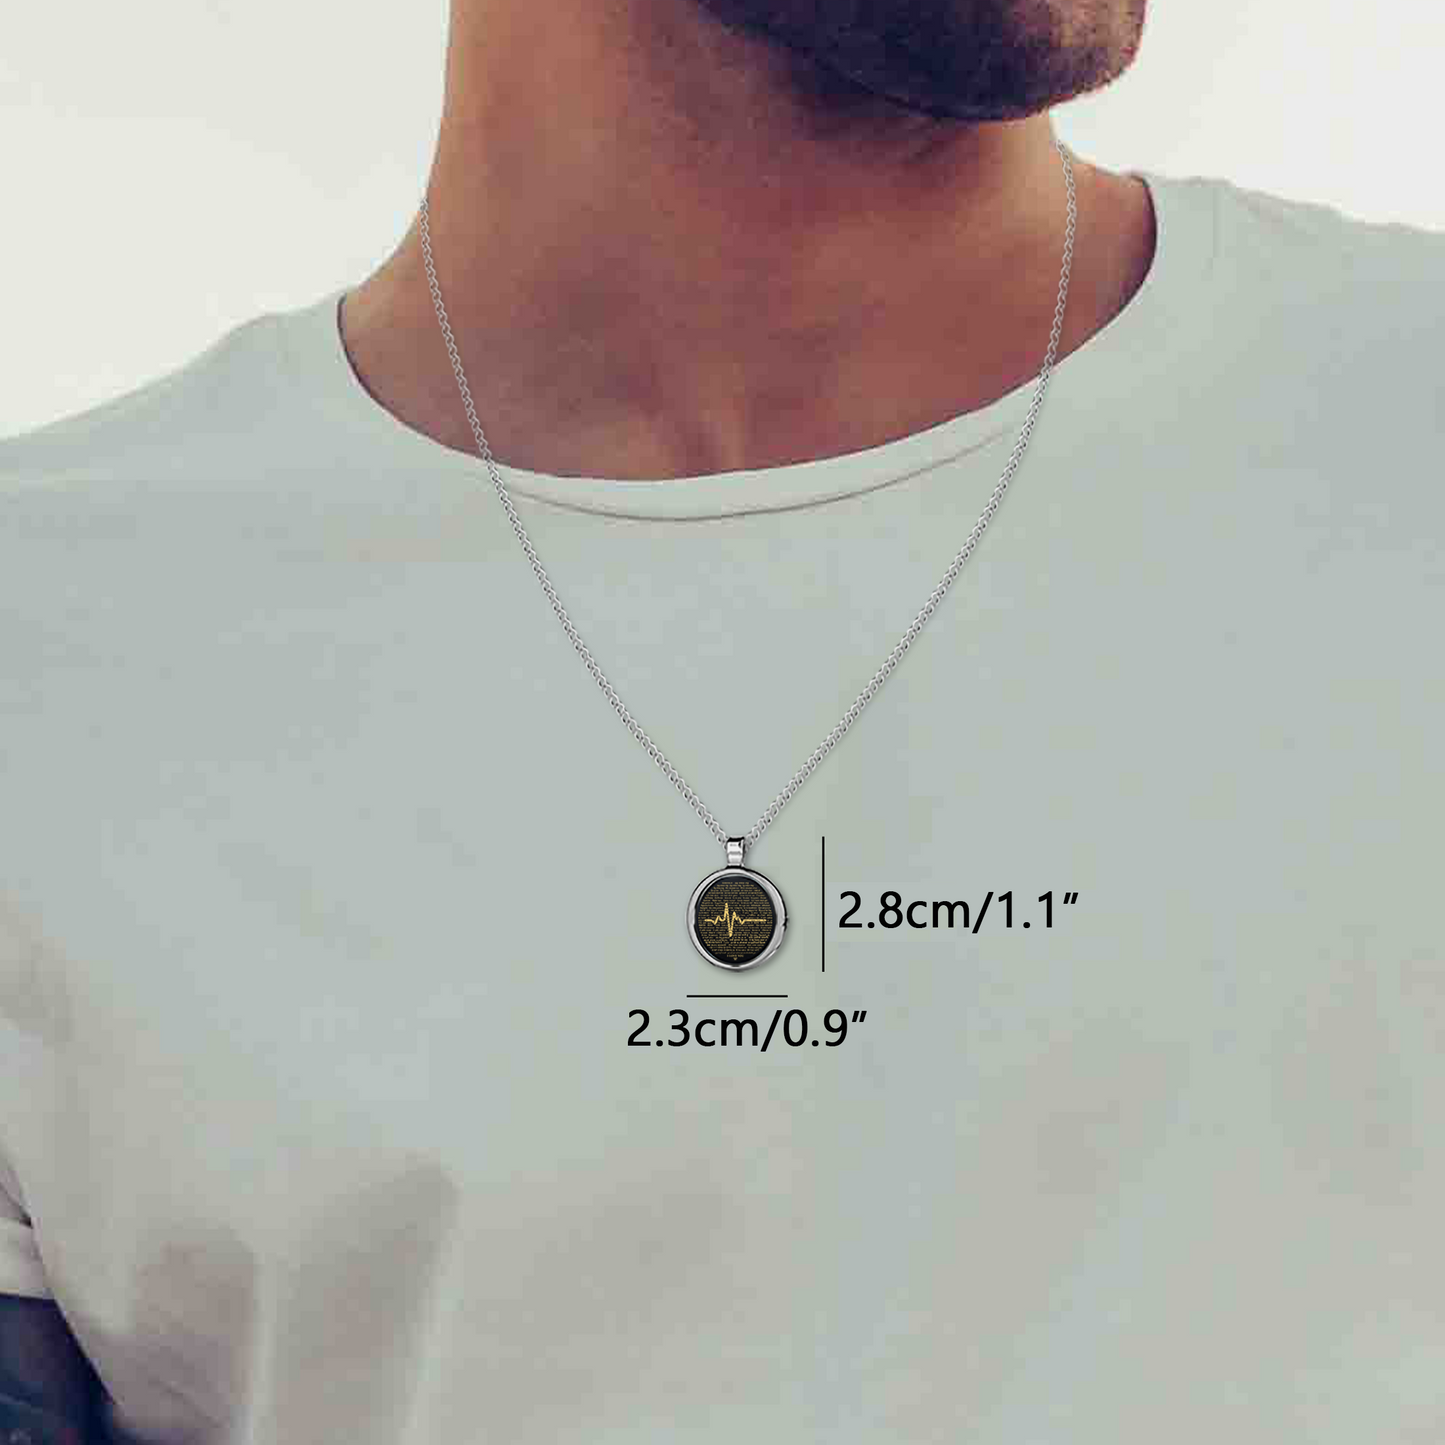 His Heartbeat of Love Necklace Over 100 Languages I Love You Pendant